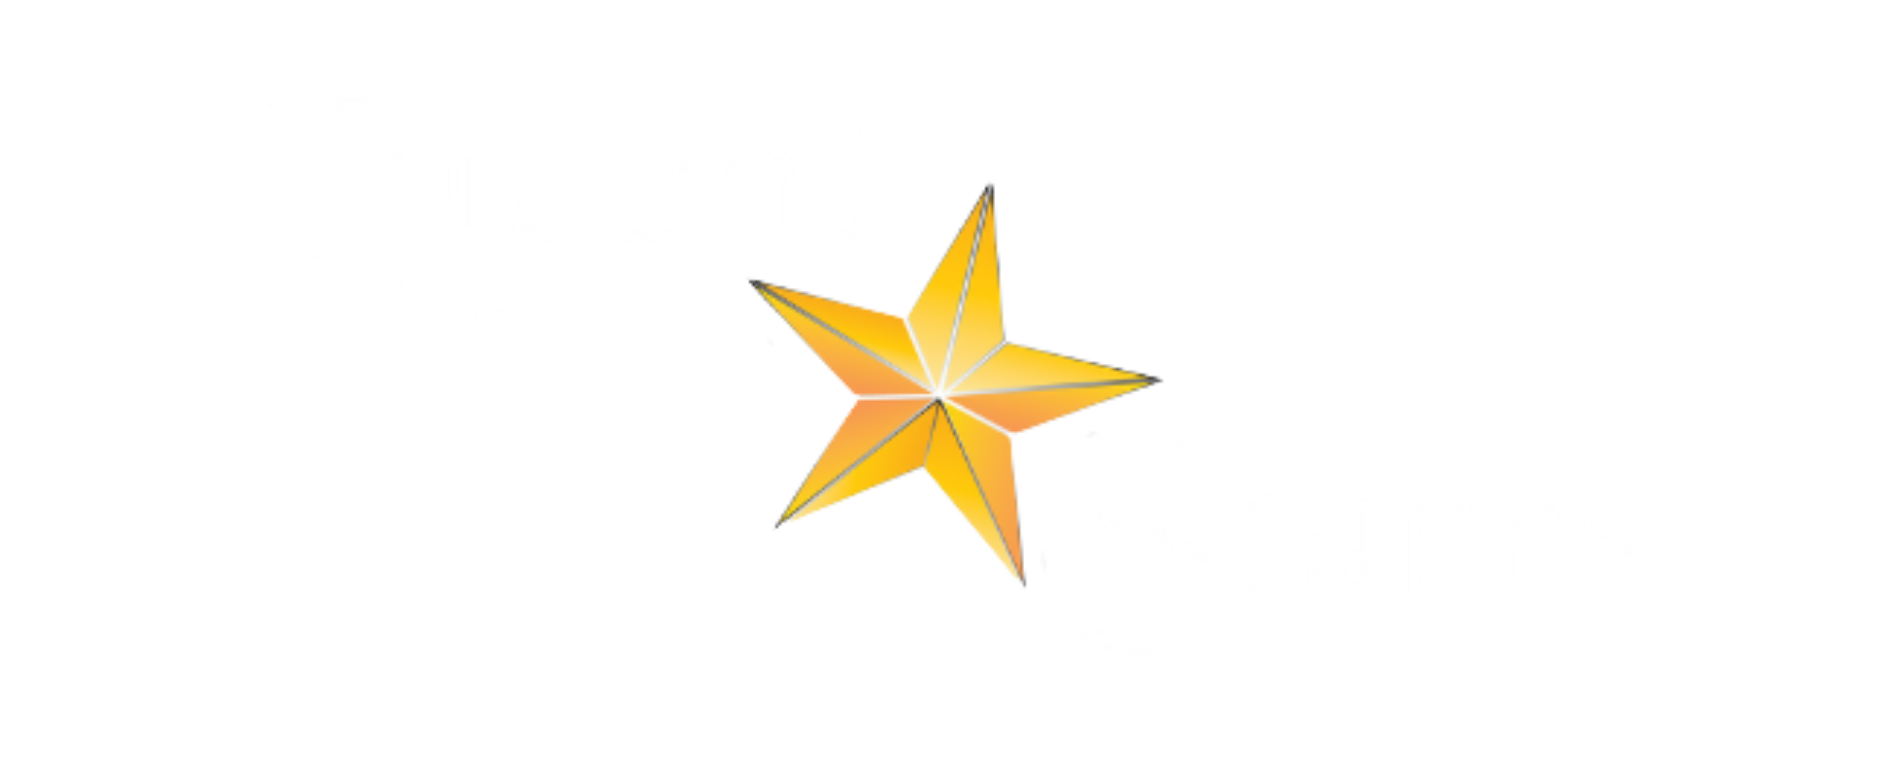 Welcome to Lucent Starrs!